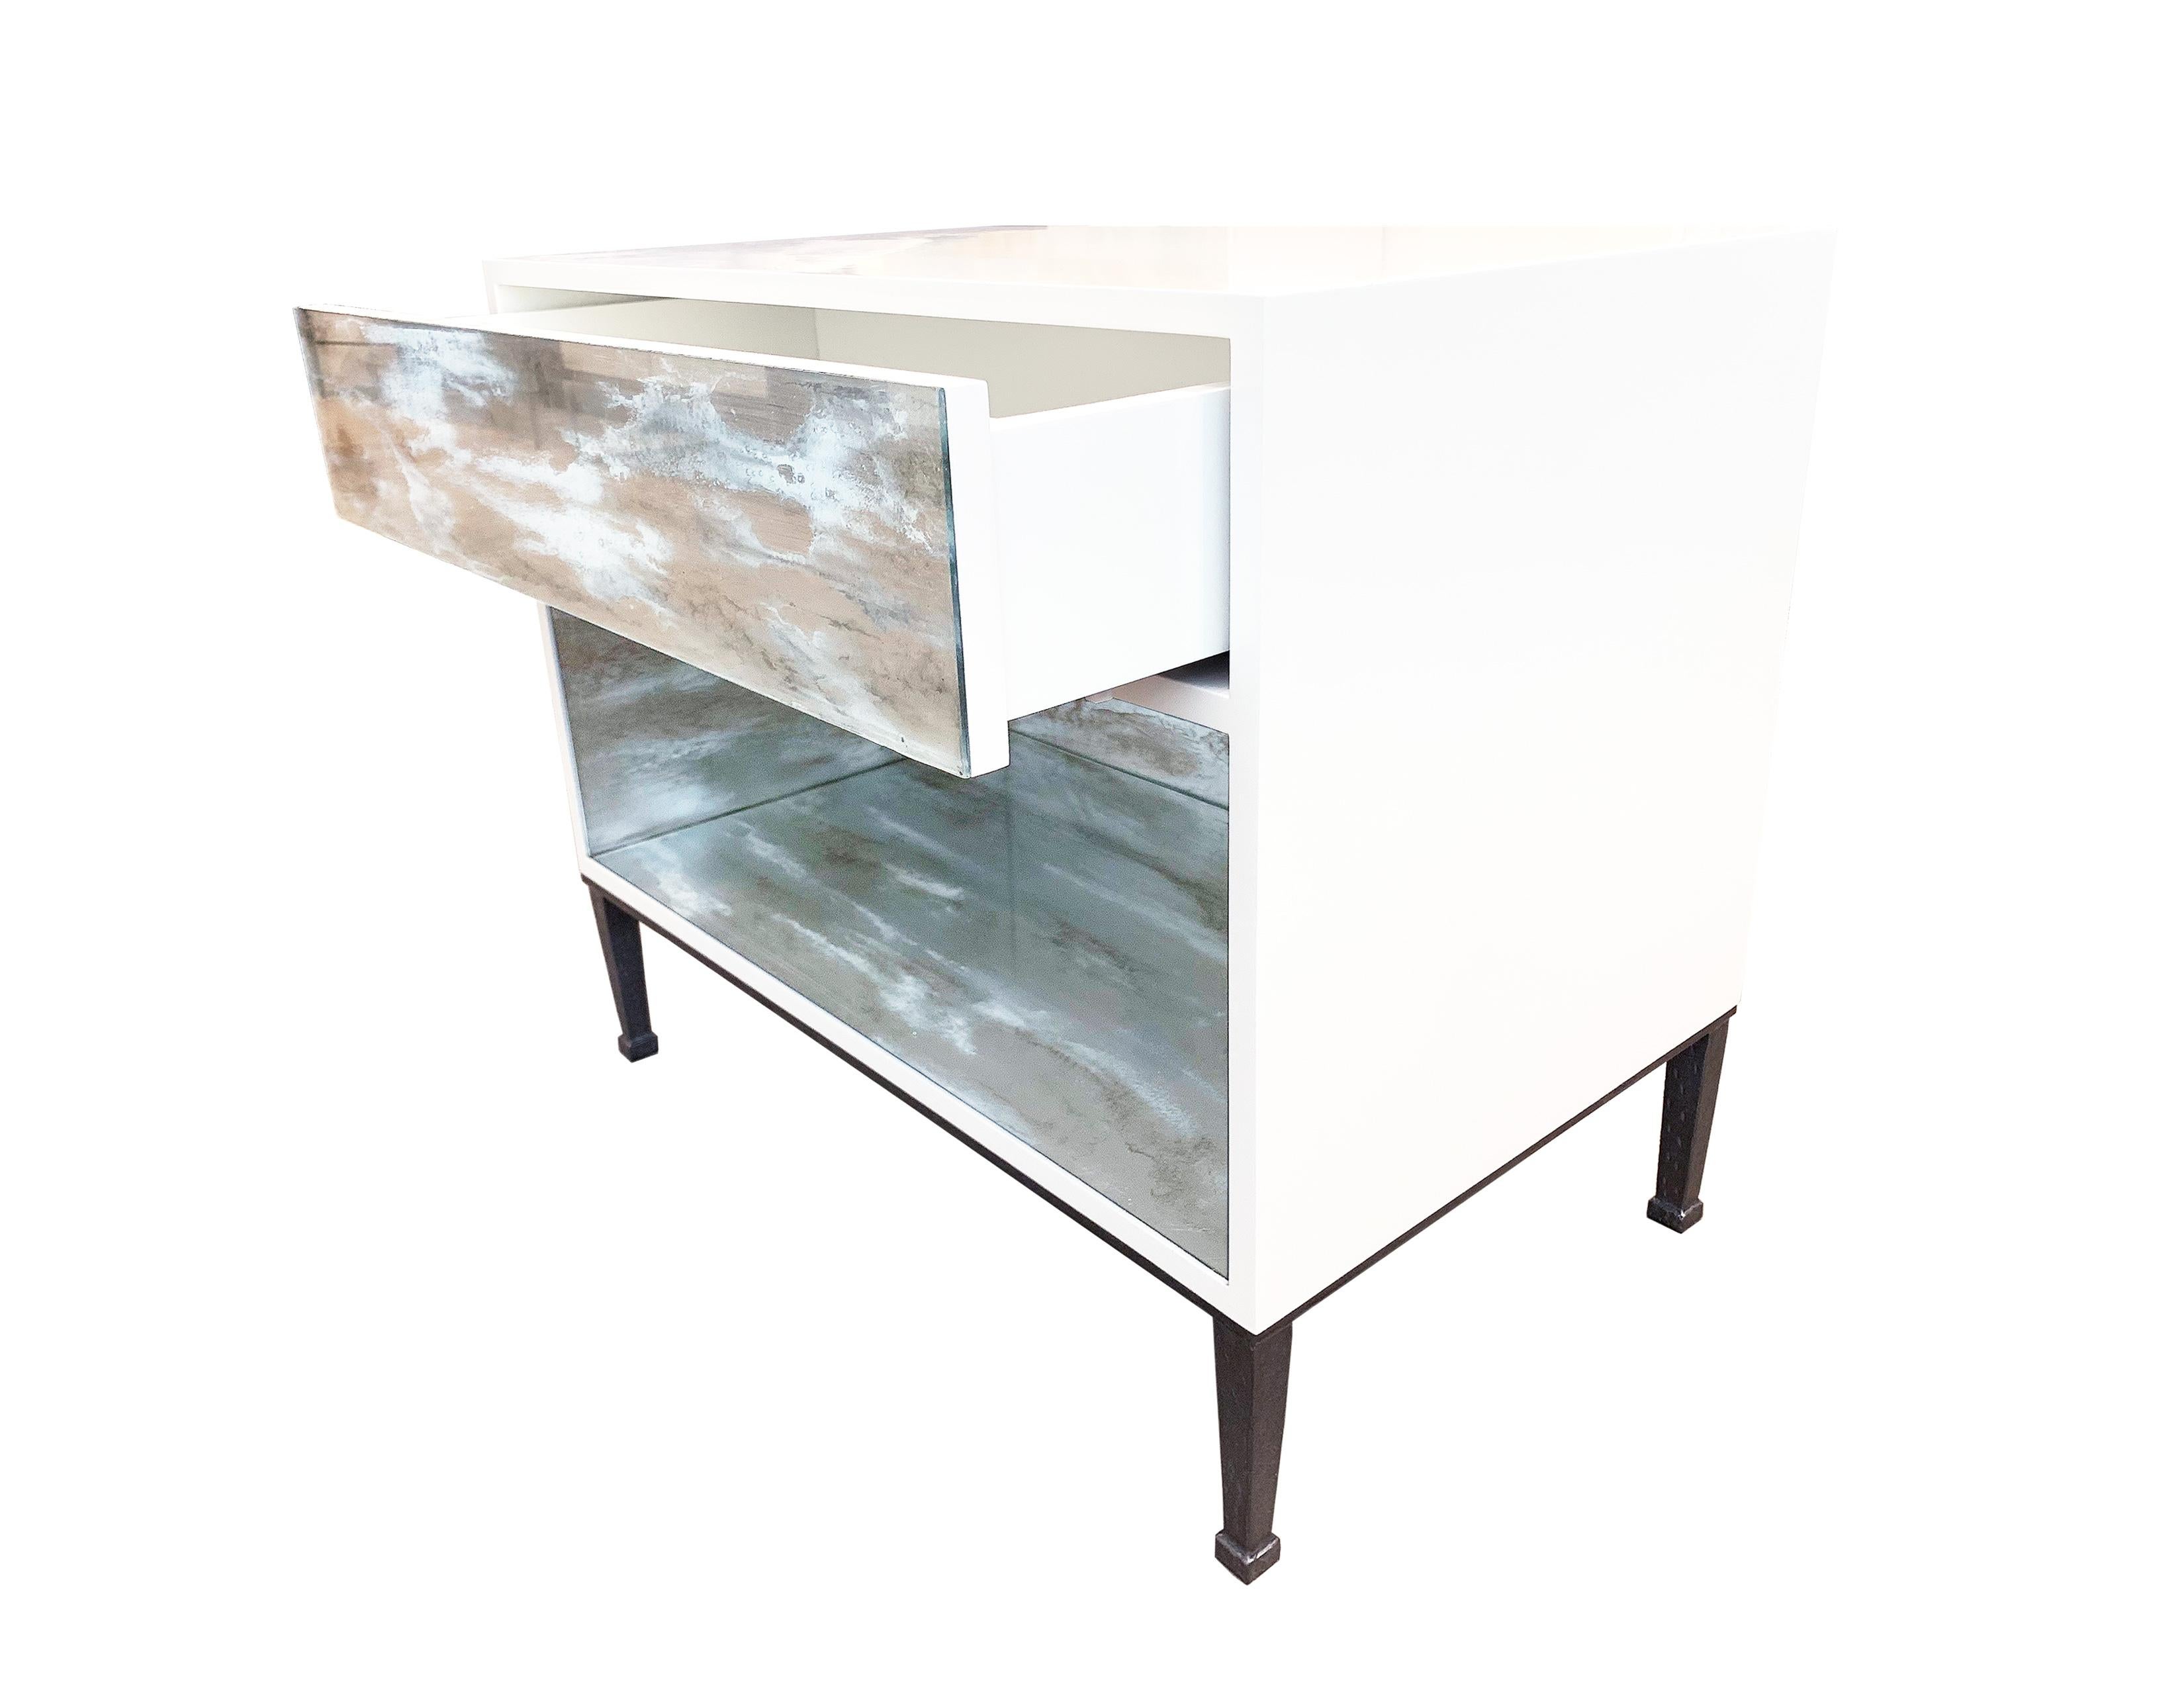 The industrial nightstand by Ercole Home has one drawer front, with white lacquer wood finish.
A hand painted glass panel in Galaxy decorates the surface of the drawer and open shelf.
The industrial metal base is in Pewer finish.
The drawer with